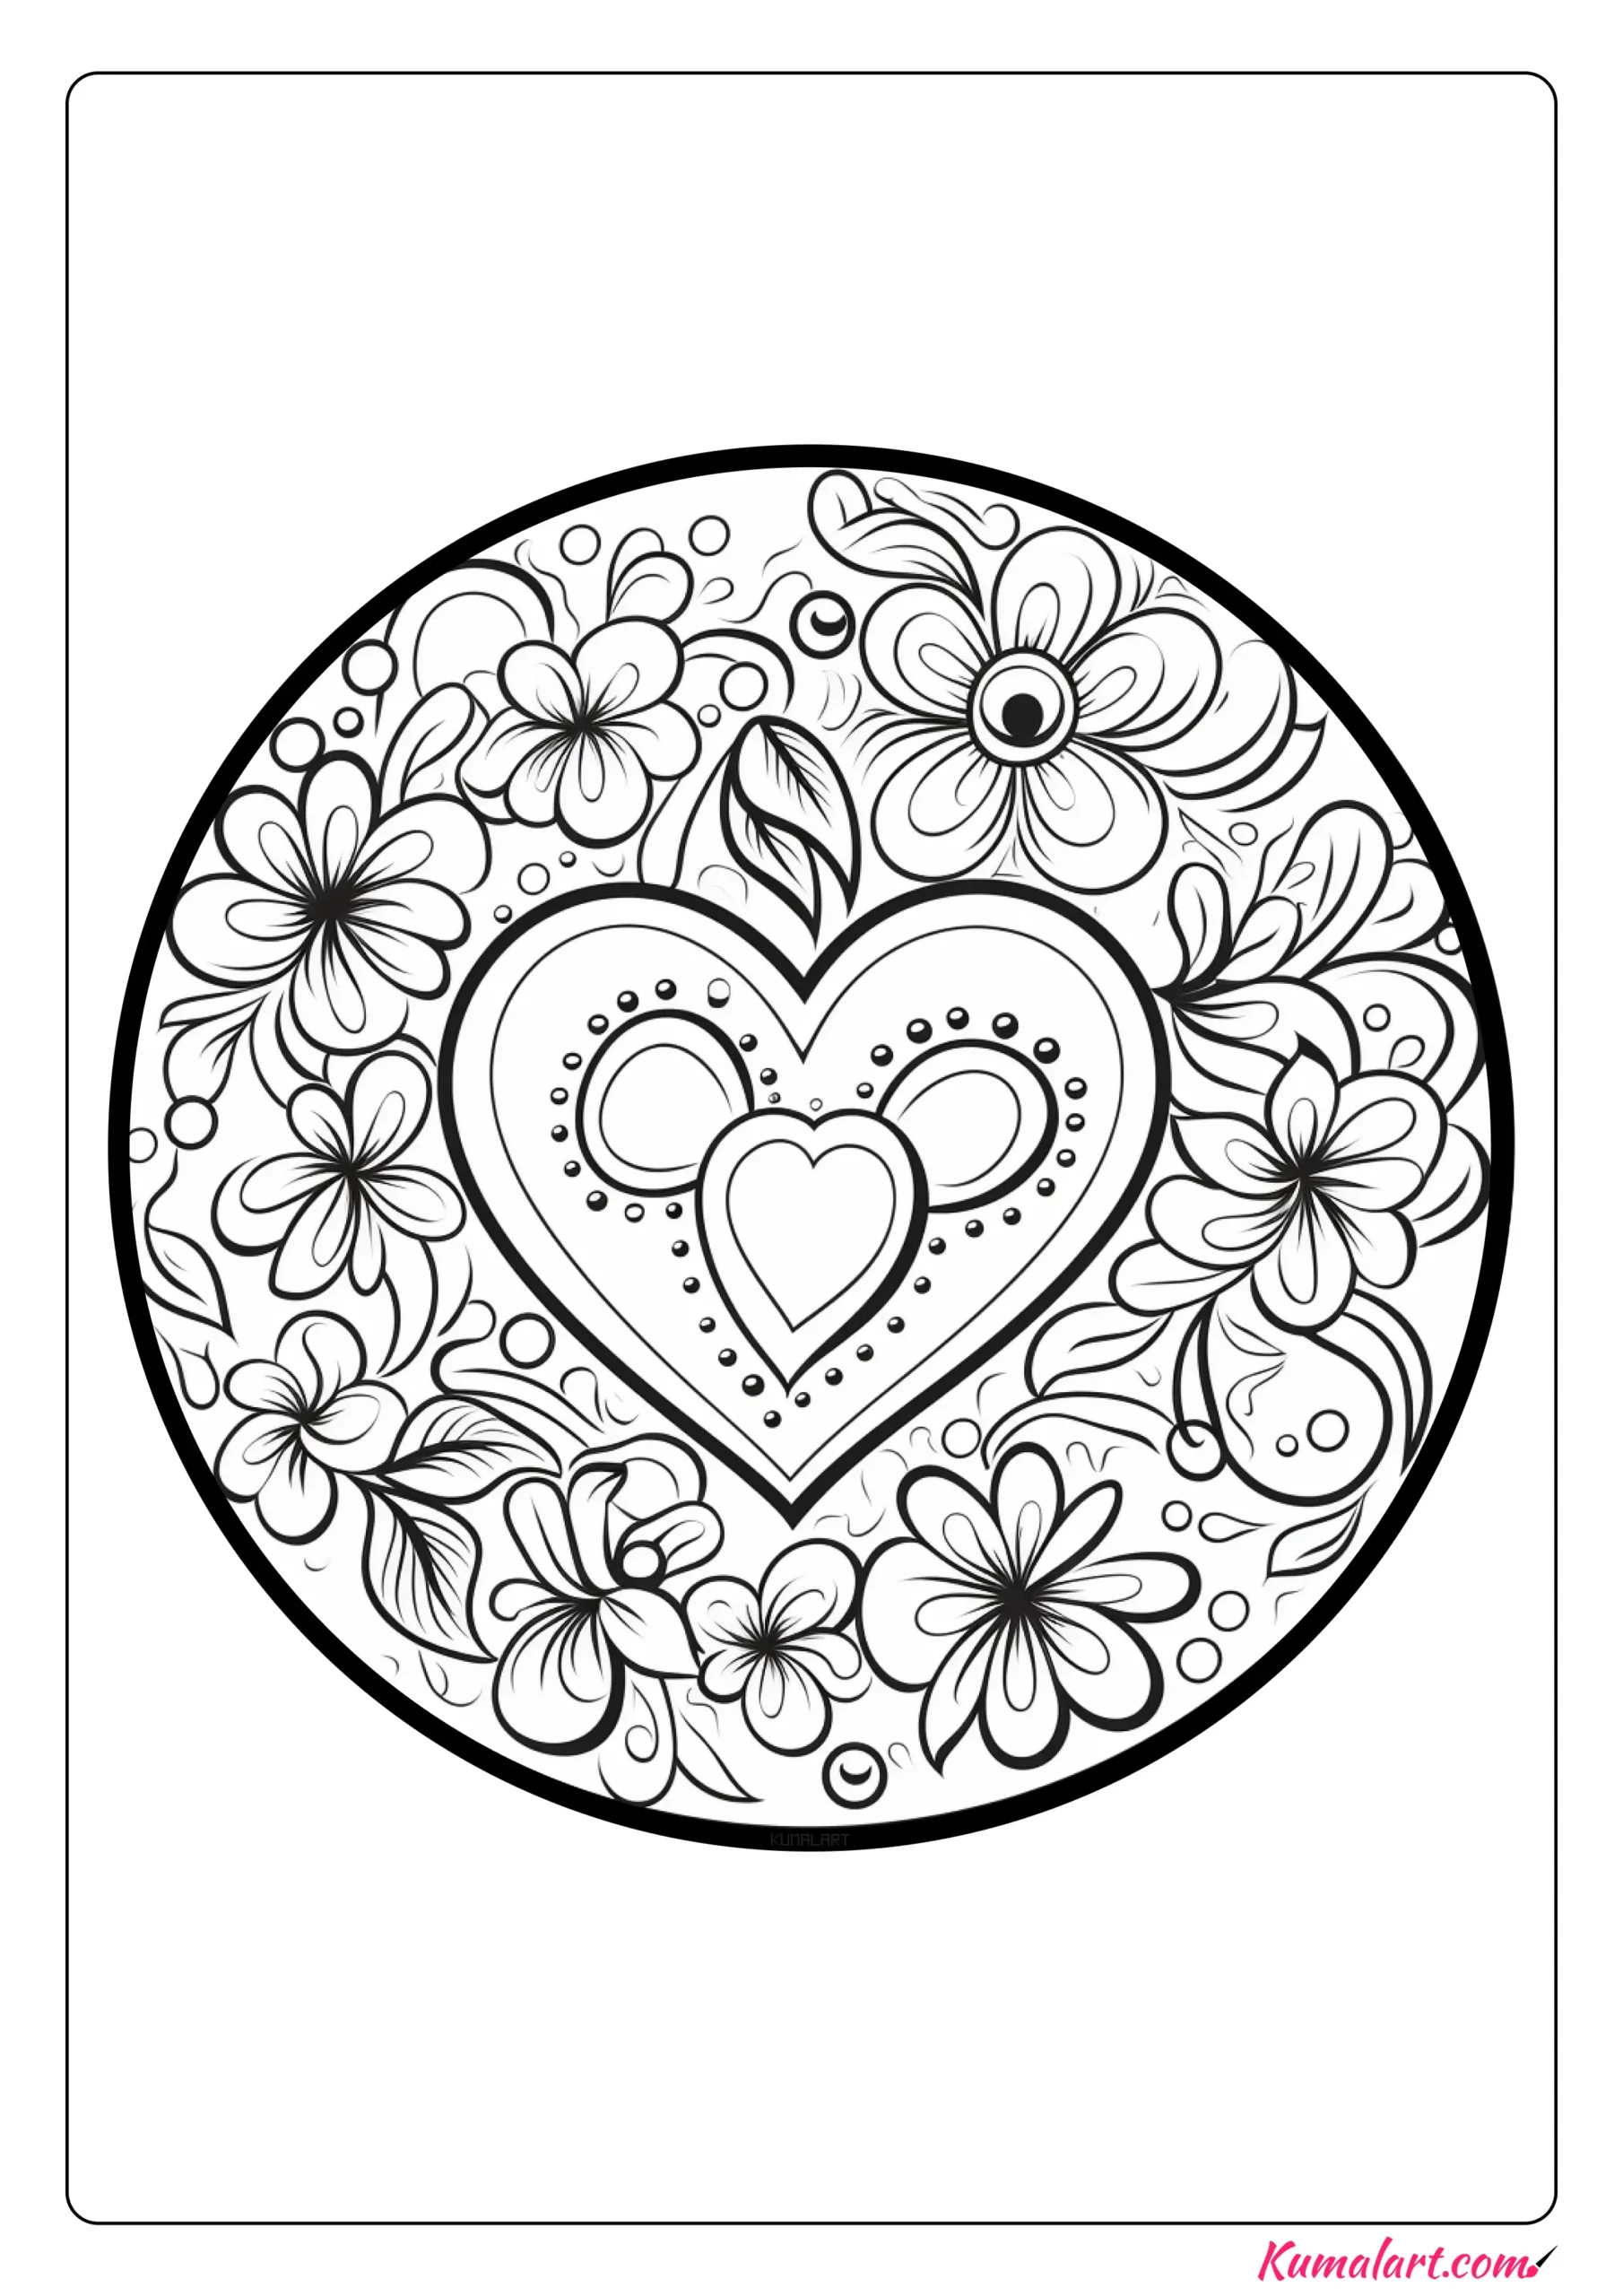 Touching Valentine’s Day Mandala Coloring Page